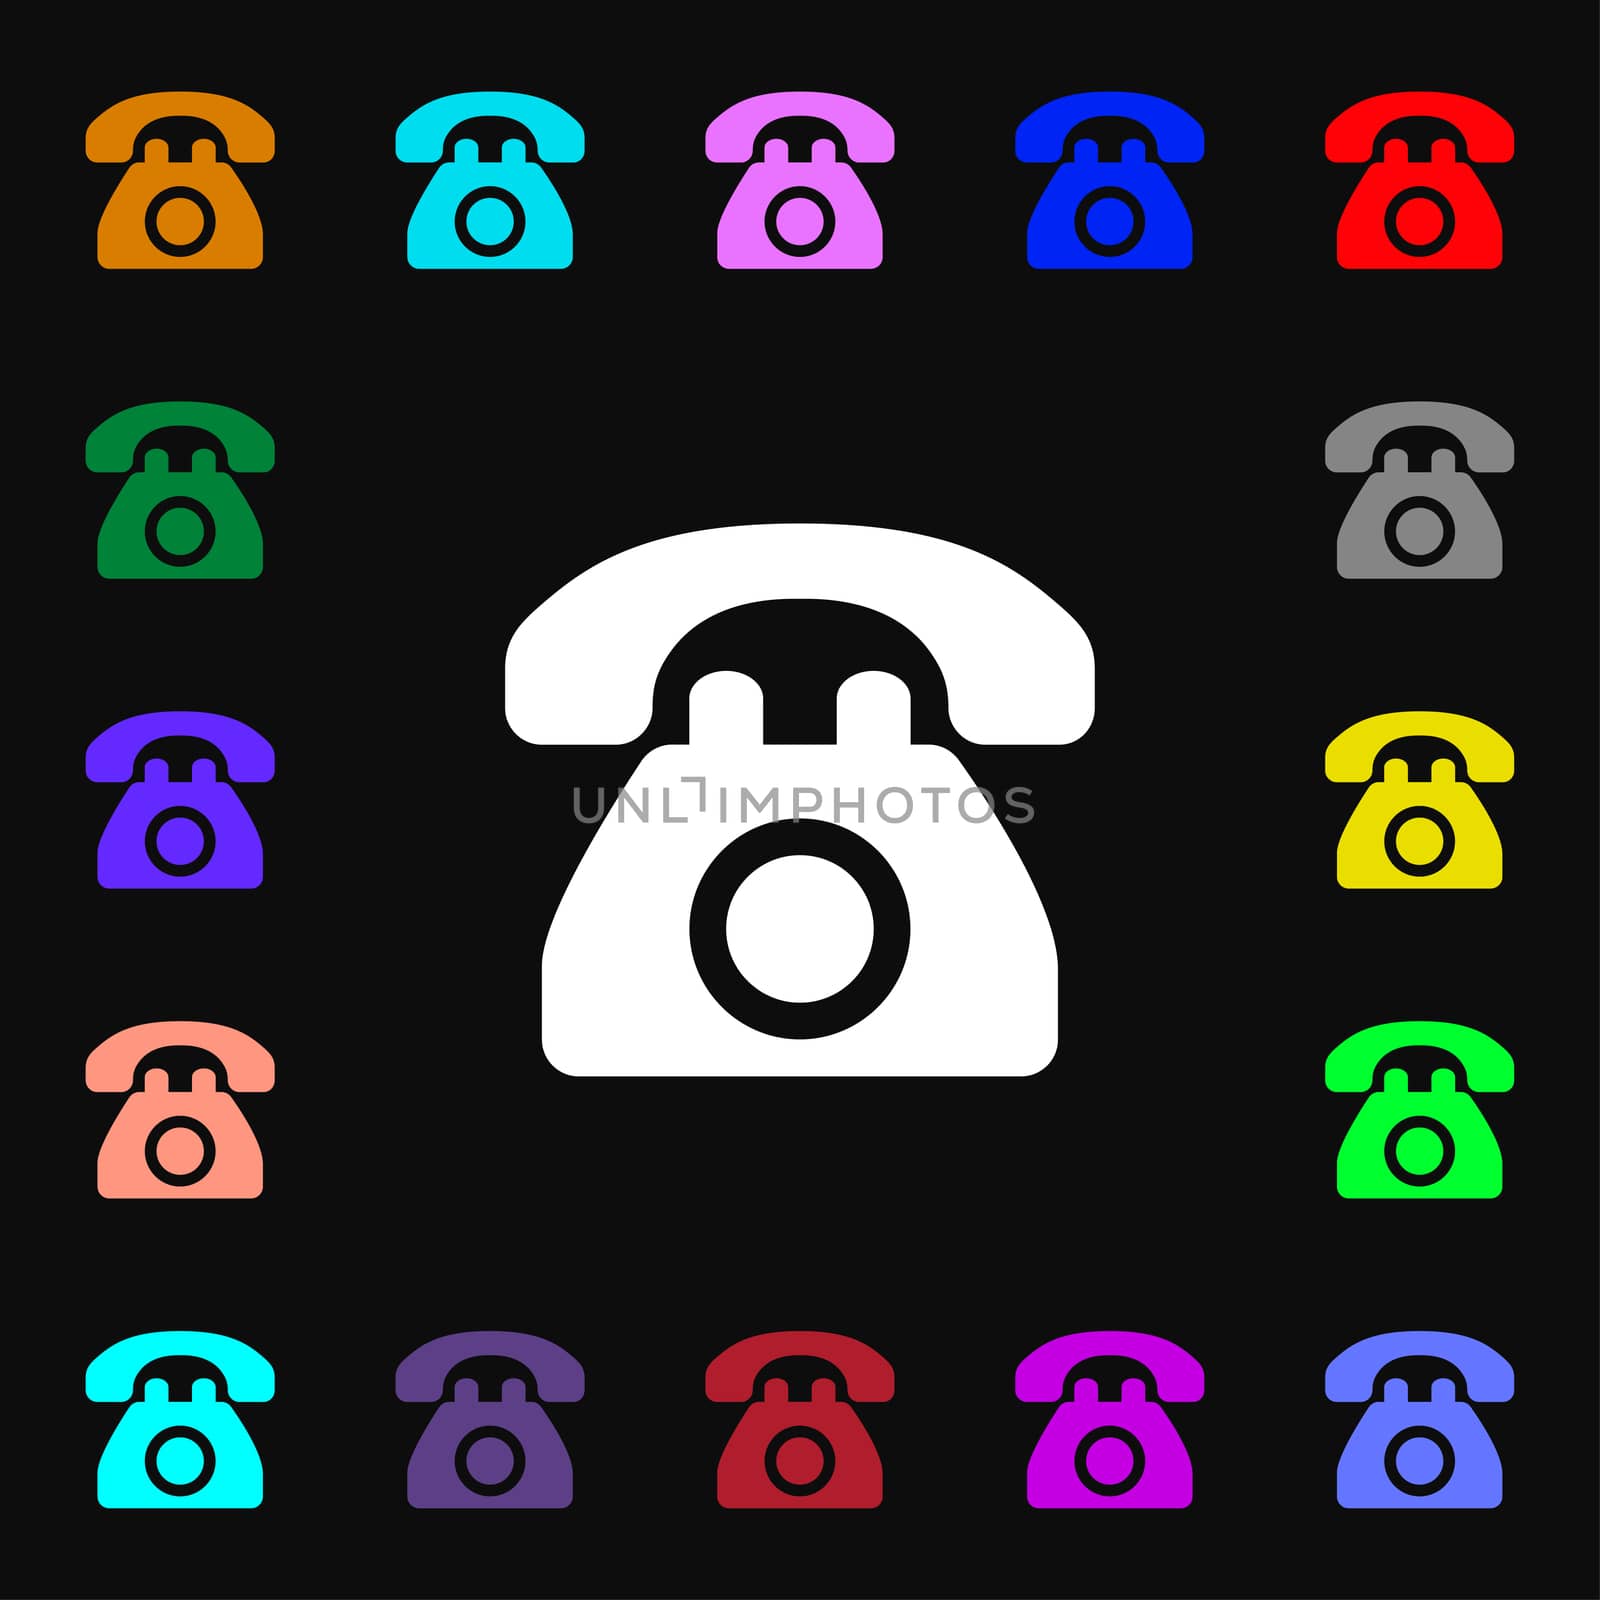 Retro telephone icon sign. Lots of colorful symbols for your design. illustration